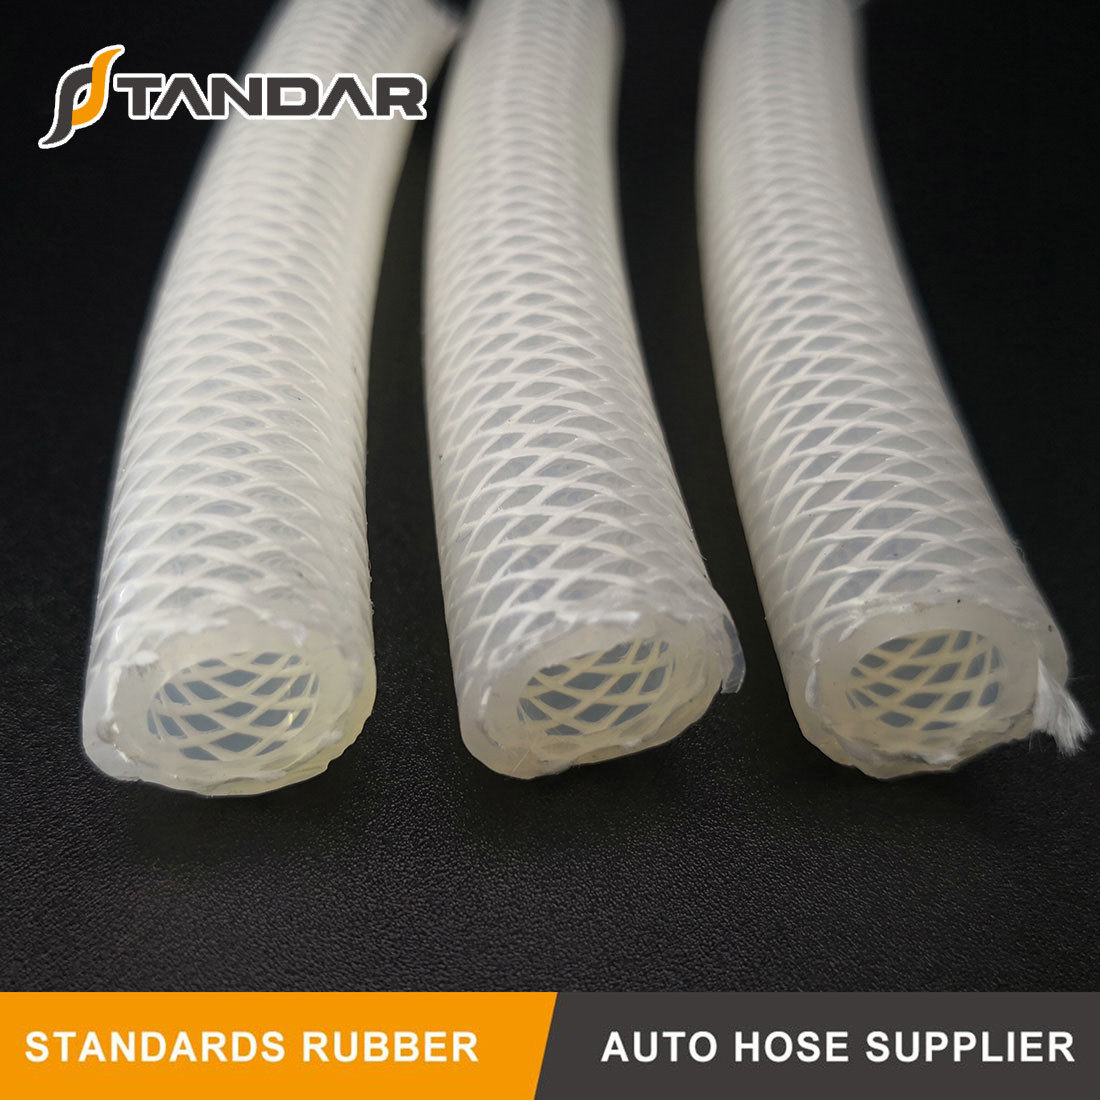 What is the hardness of silicone hose? What is the minimum hardness of silicone hose?